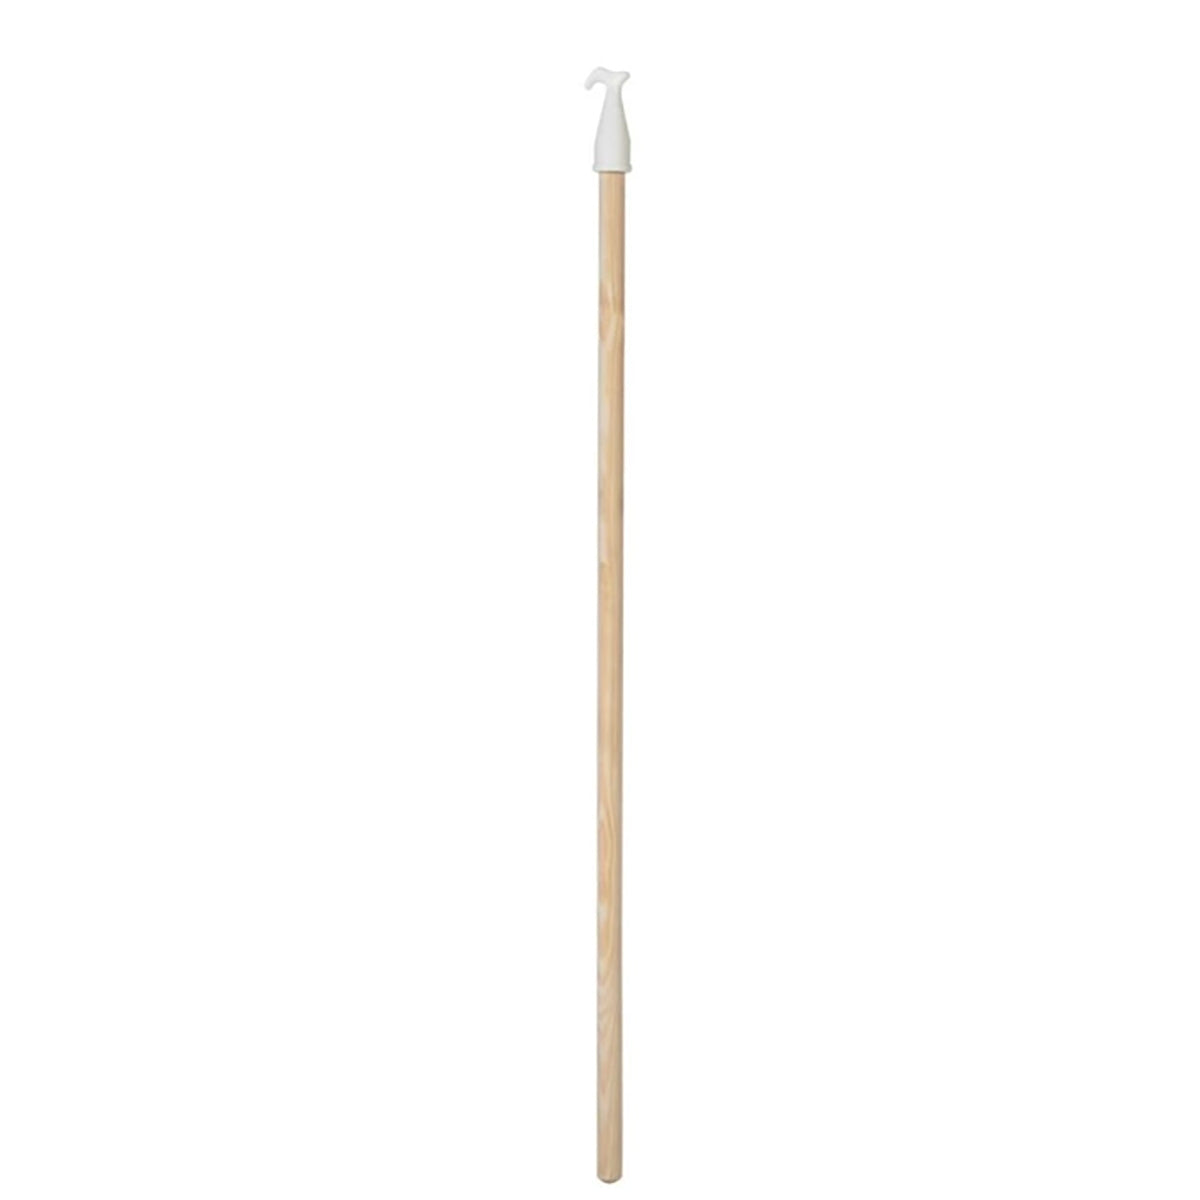 Wooden Rod With Plastic Clip - 29 in.